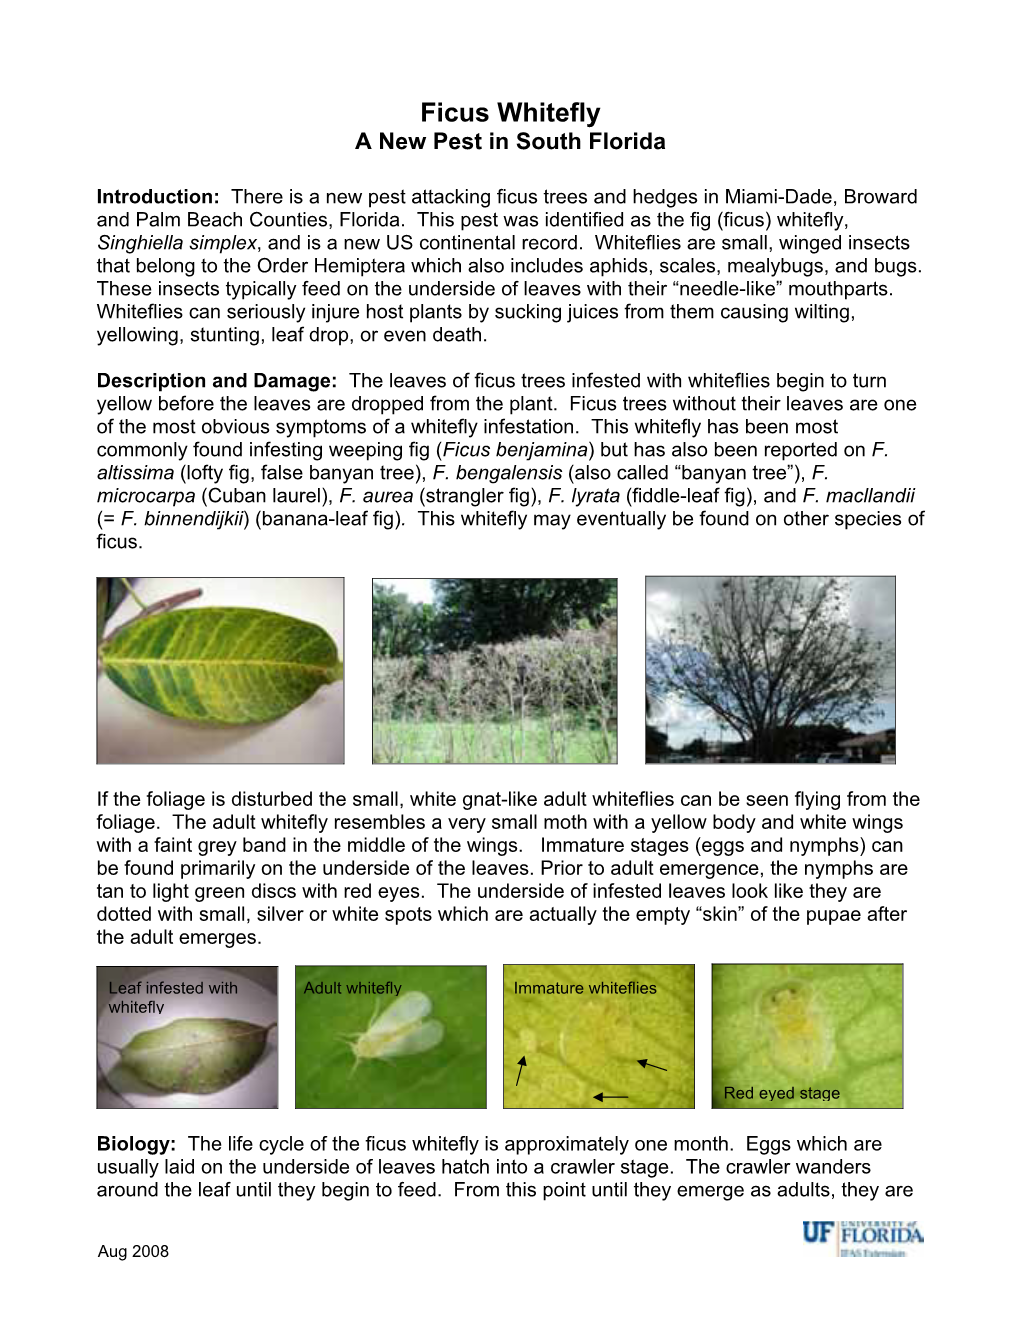 Ficus Whitefly a New Pest in South Florida